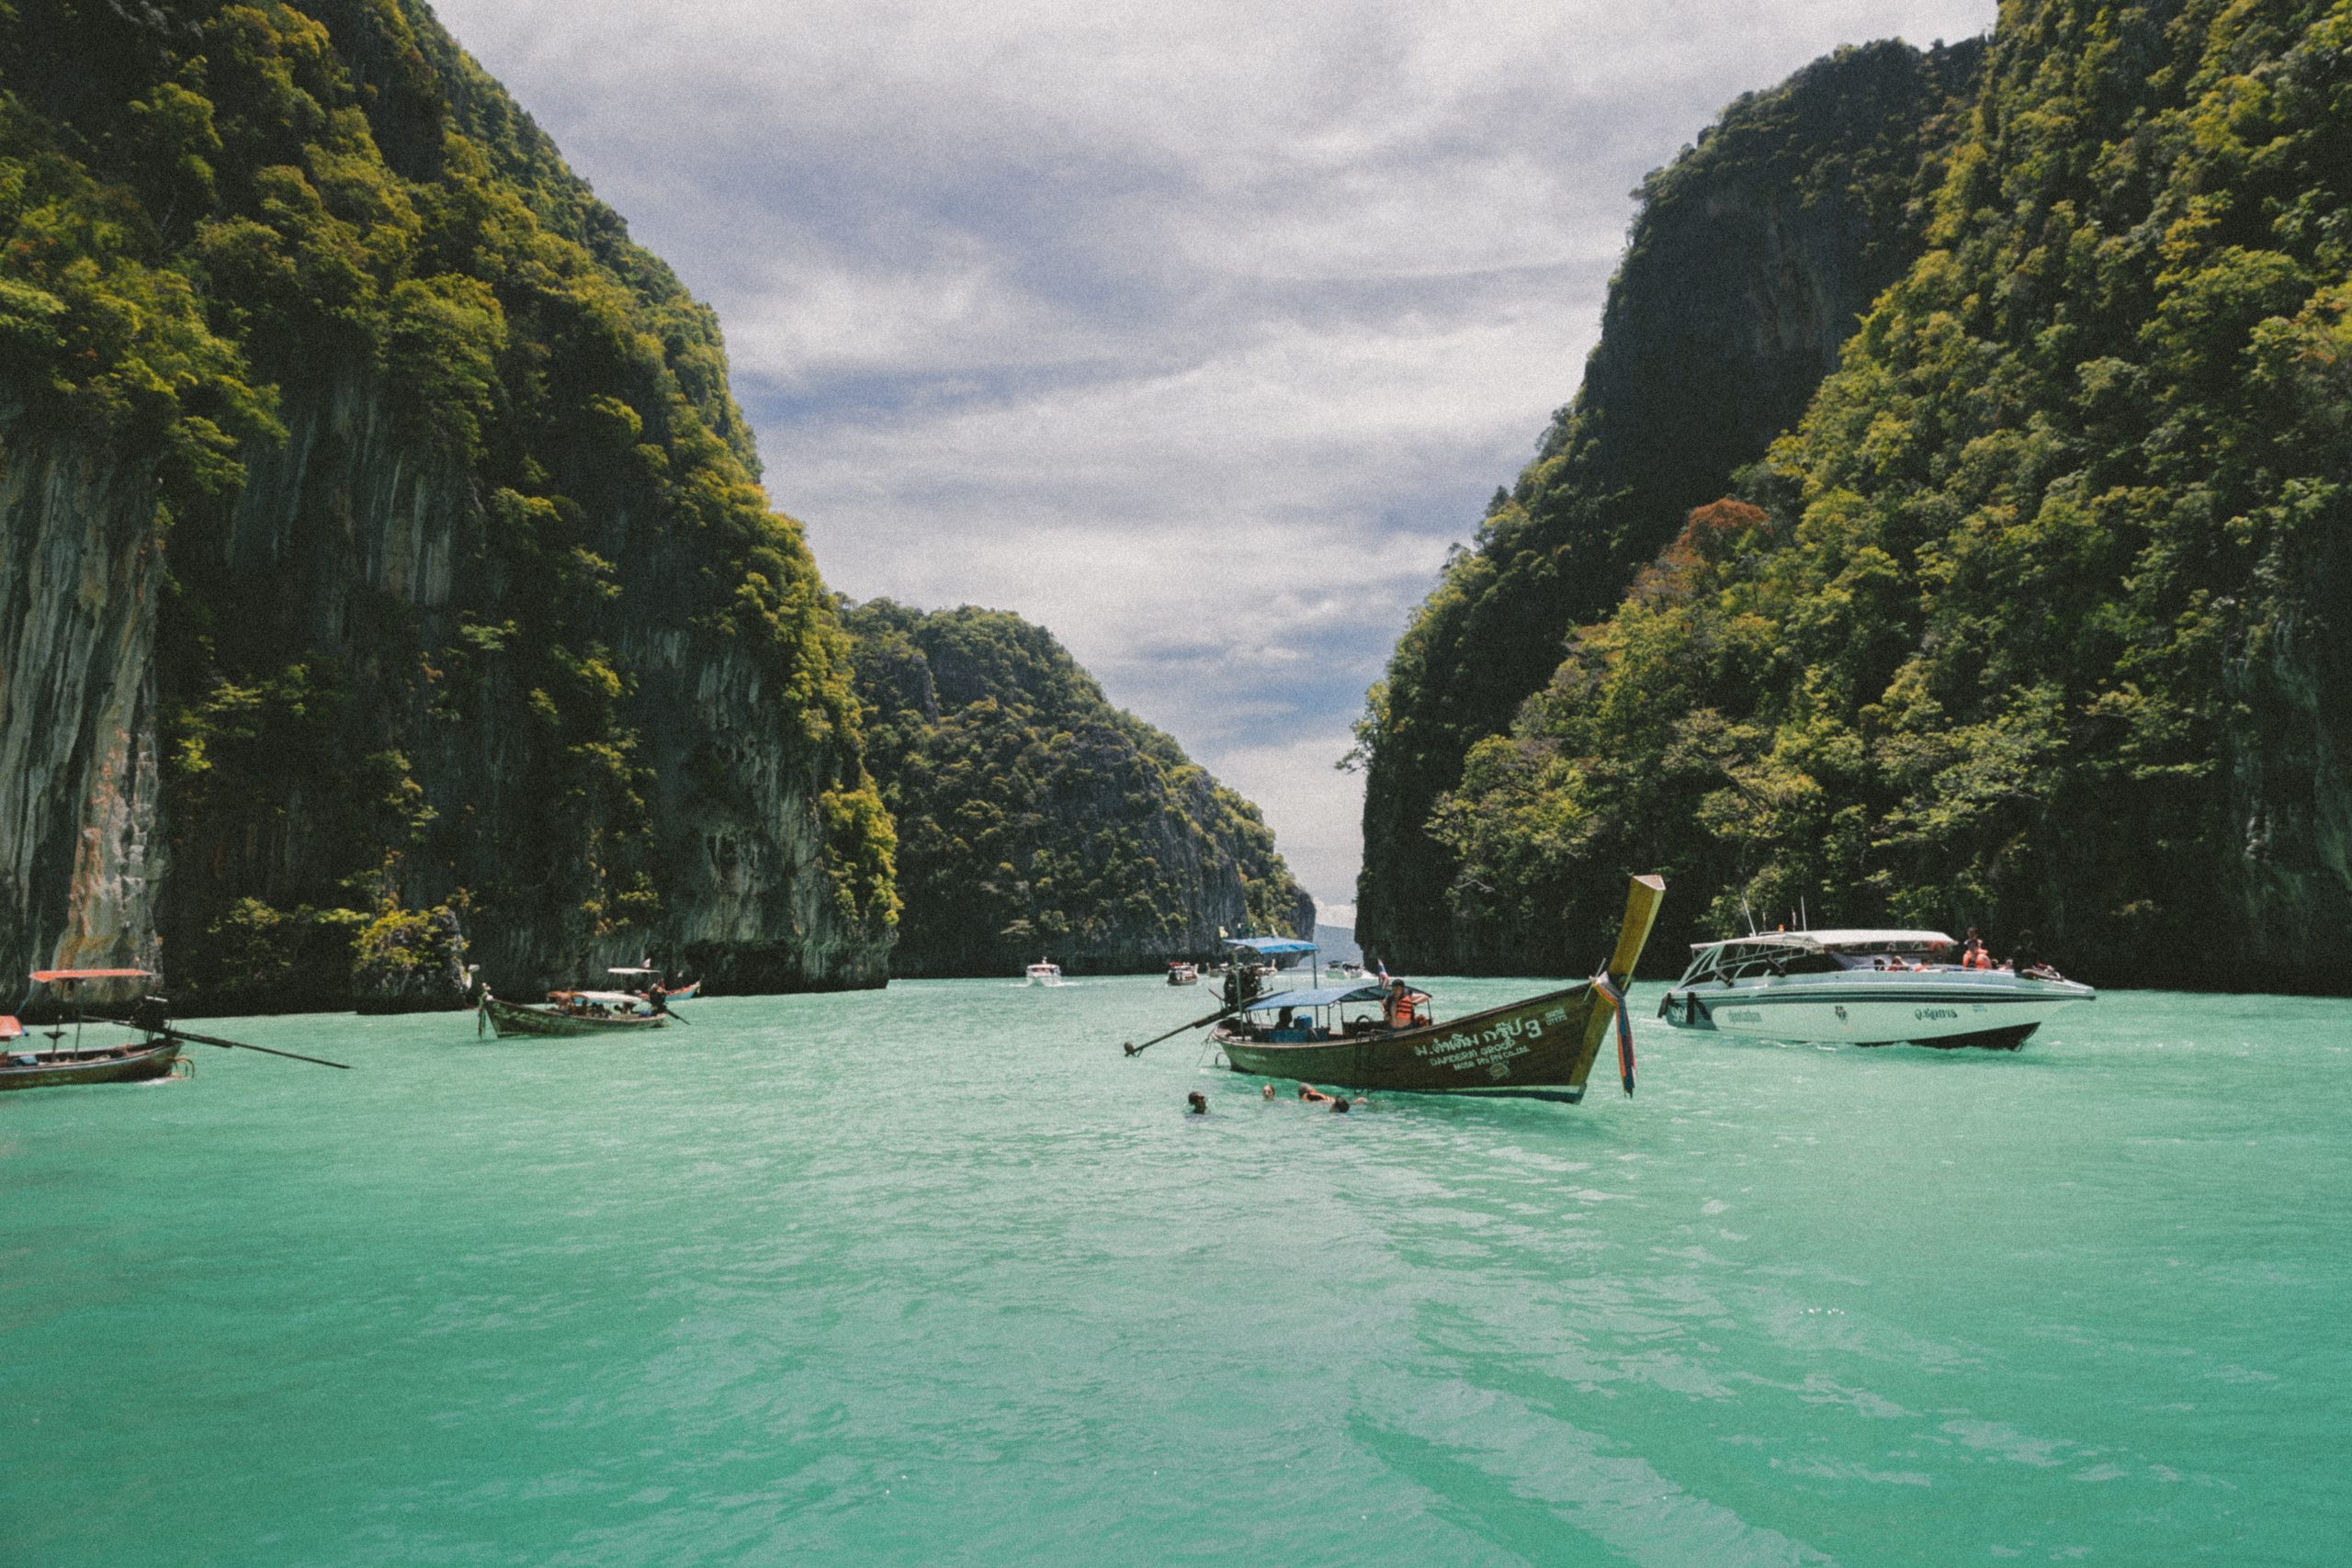 in article about honeymoon destinations, a river in Thailand